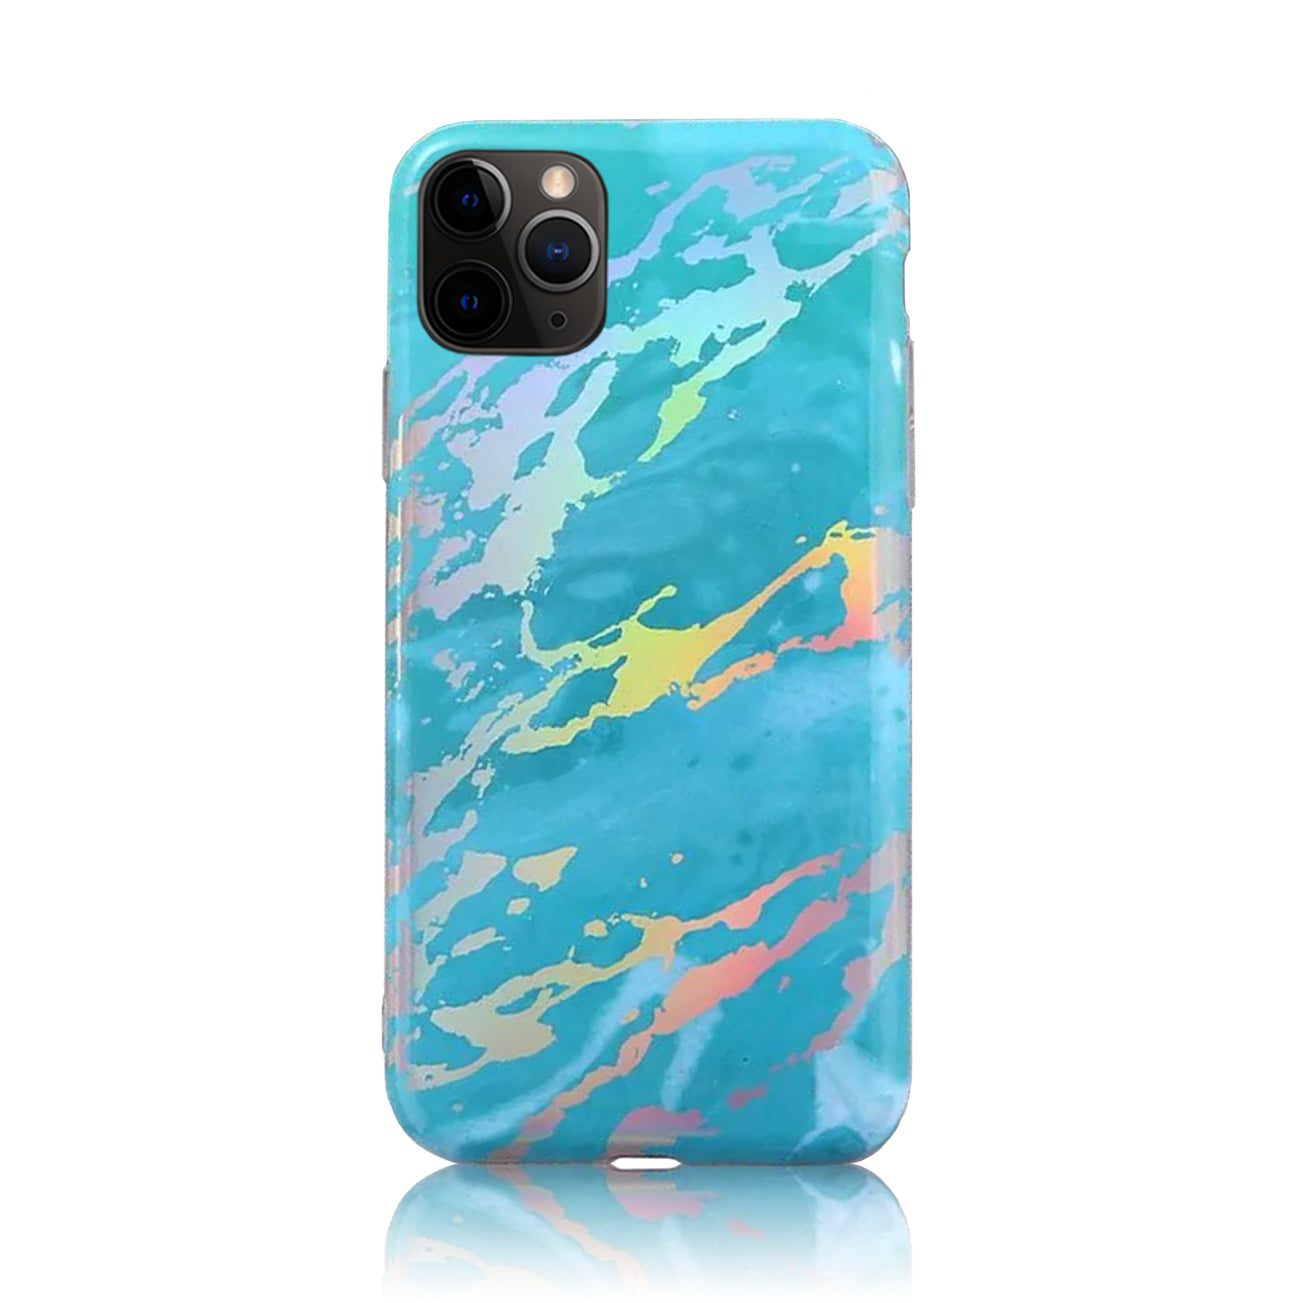 Turquoise Silver Holographic Silicon Case